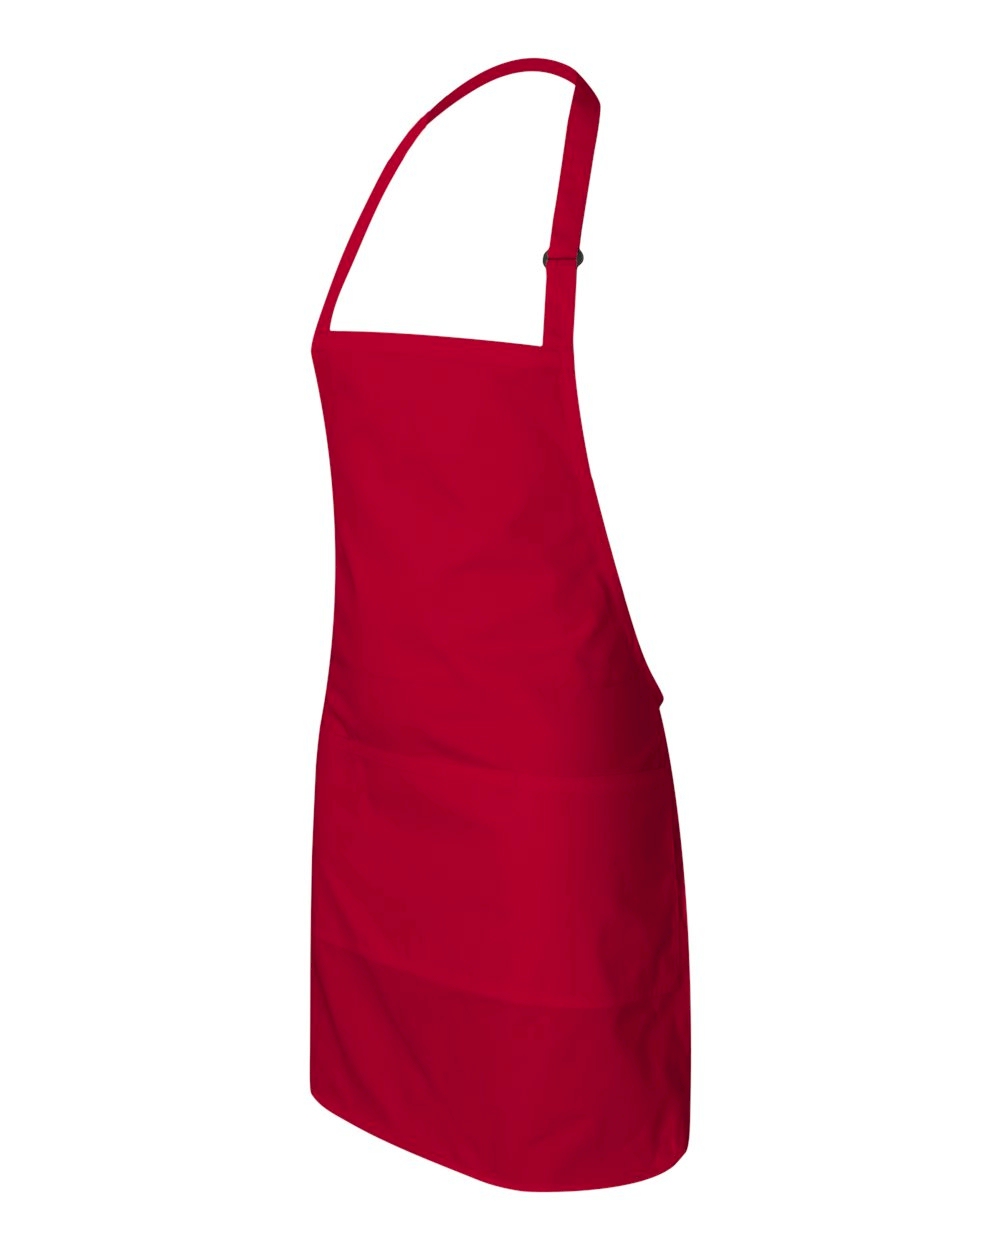 Full Apron Embroidery Blanks - AMERICAN RED